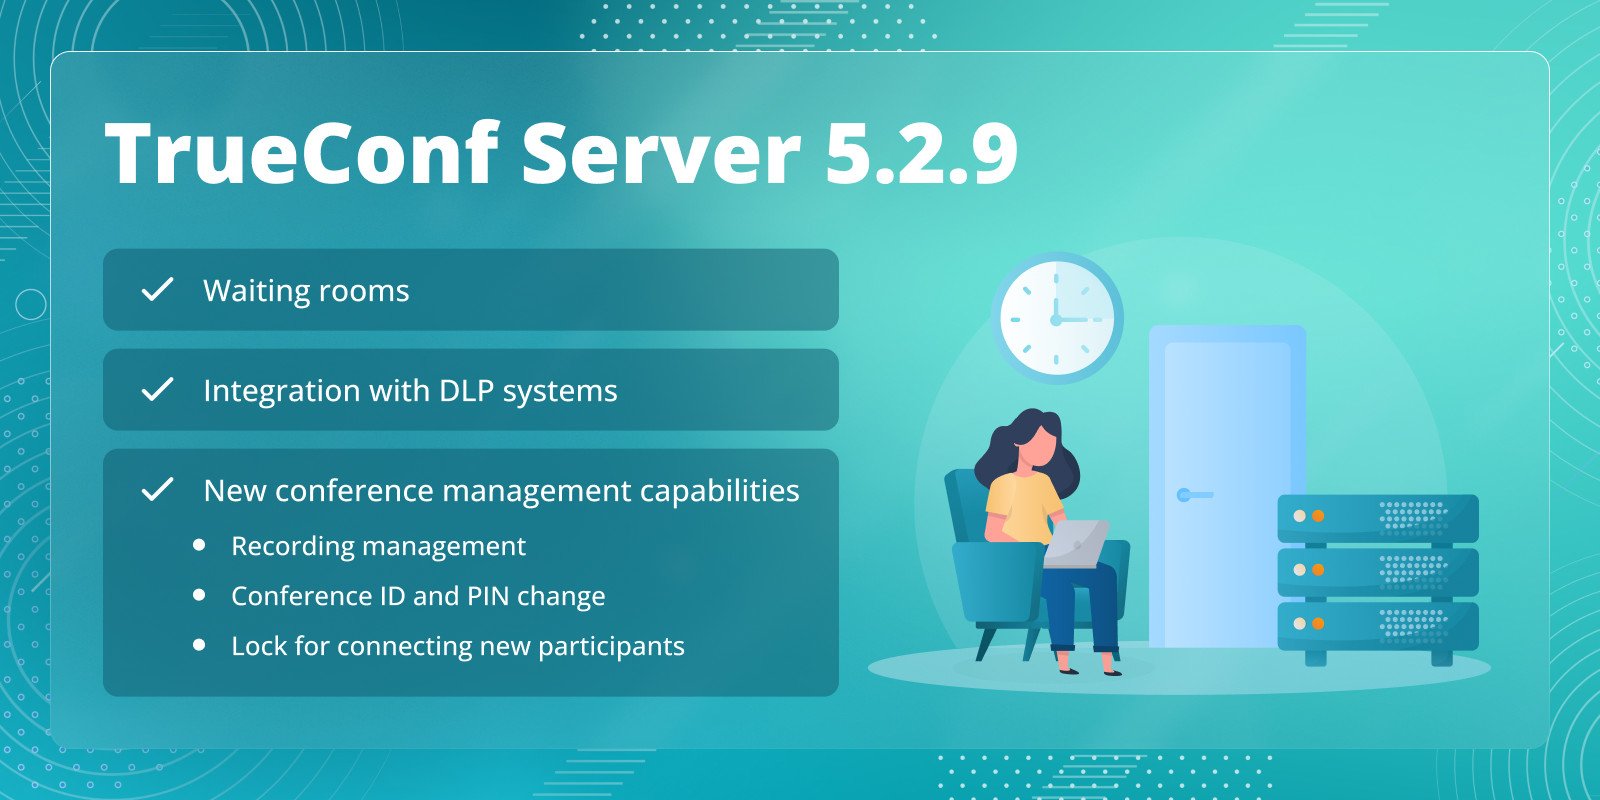 TrueConf Server 5.2.9: Waiting rooms, integration with DLP systems, and new capabilities of real-time meeting management 1